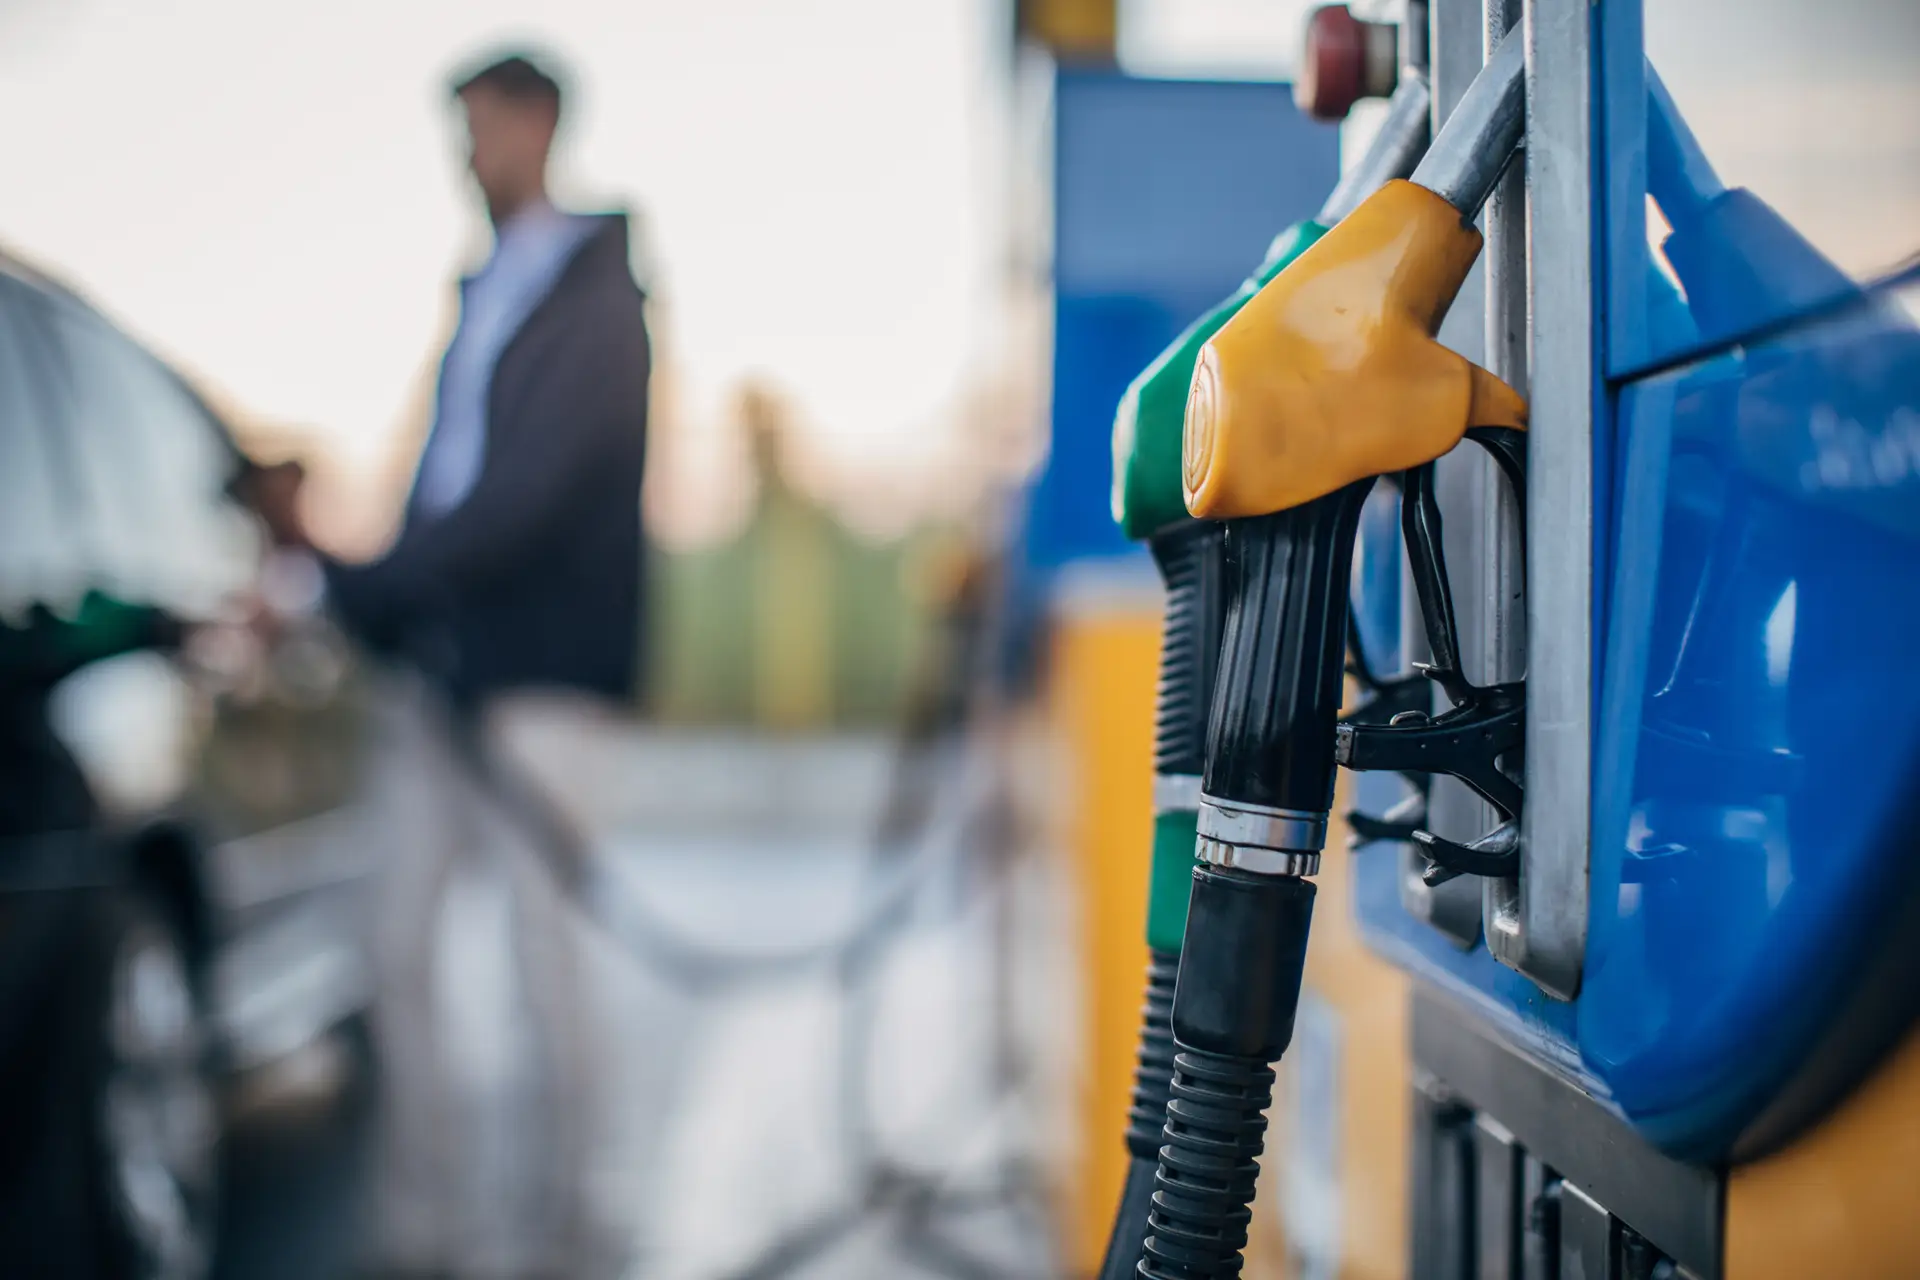 Fuel prices are expected to fall, but for a short time